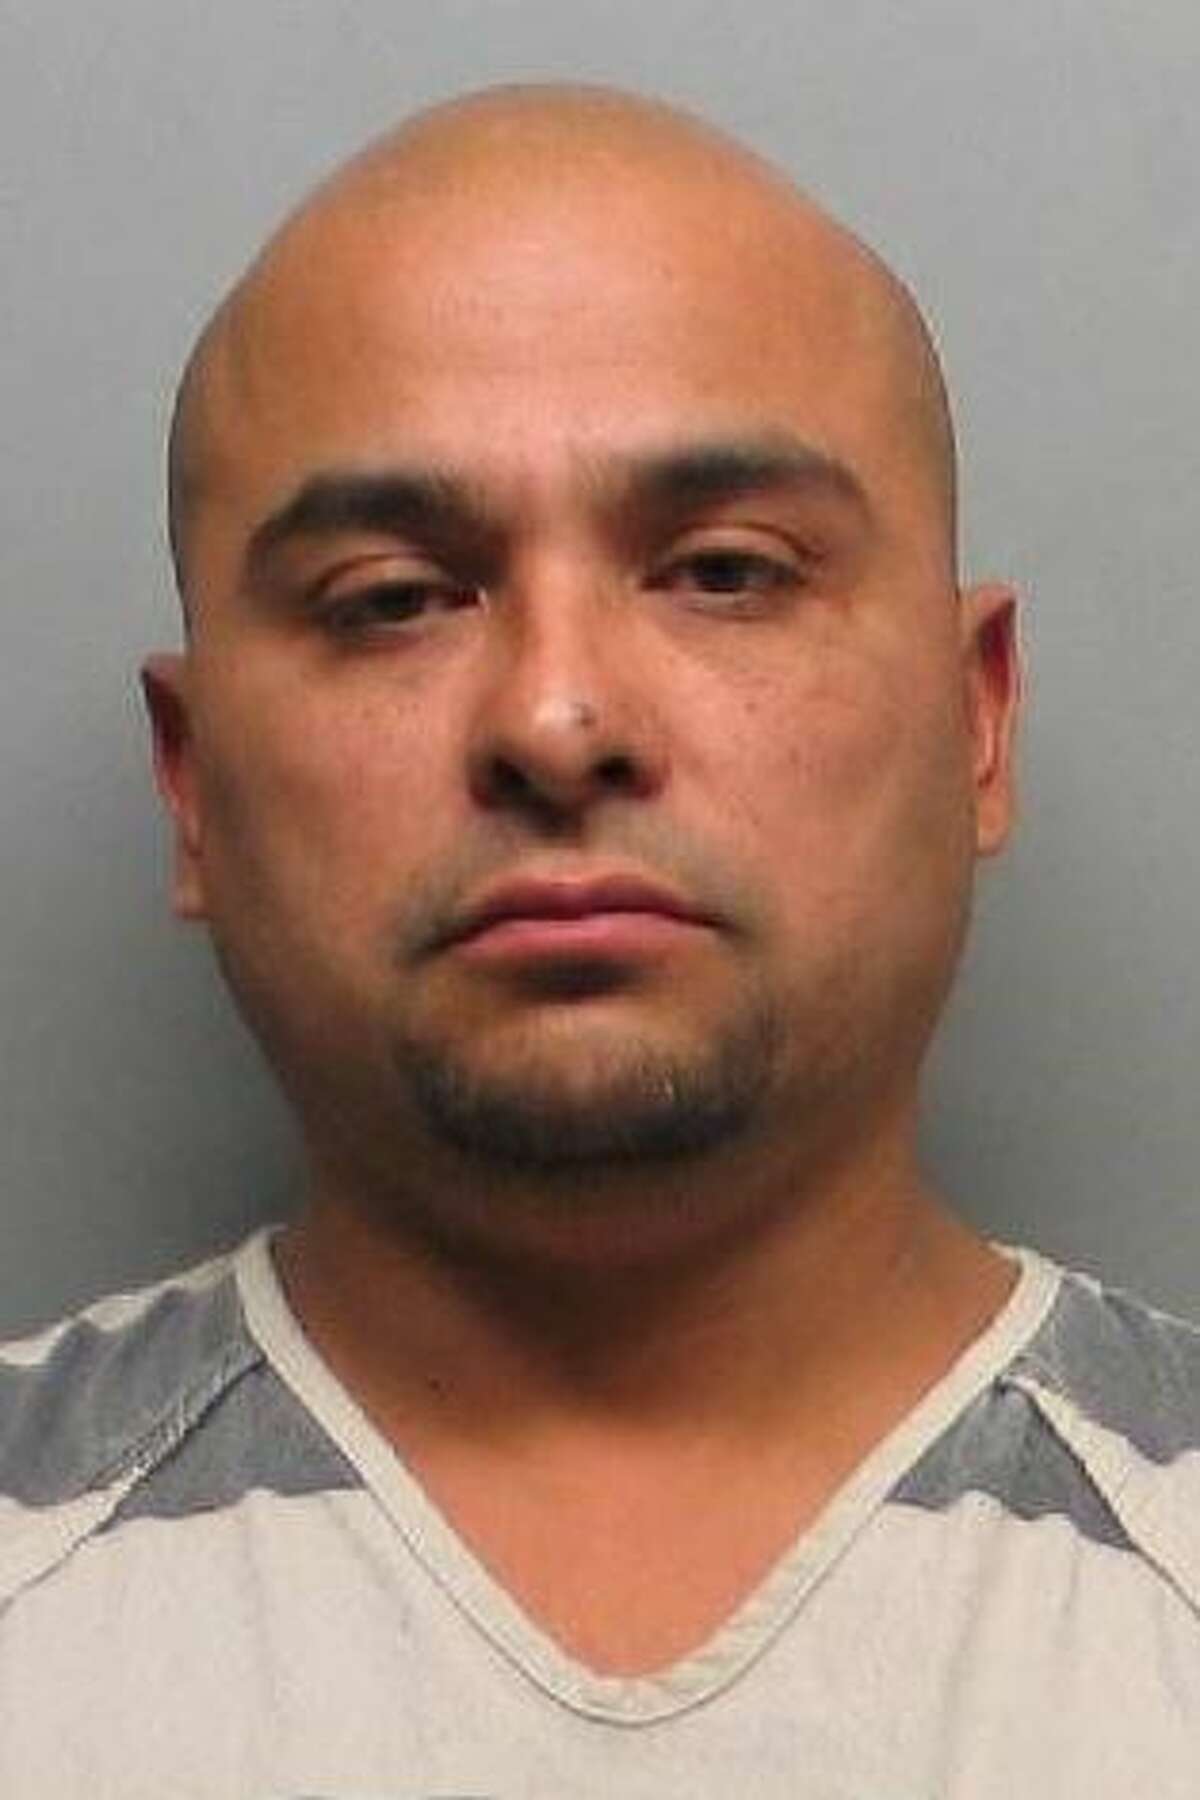 Enrique Rico, 41, pleaded guilty to a charge of robbery, a second-degree felony, during a final pretrial hearing held before 341st District Court Judge Beckie Palomo.